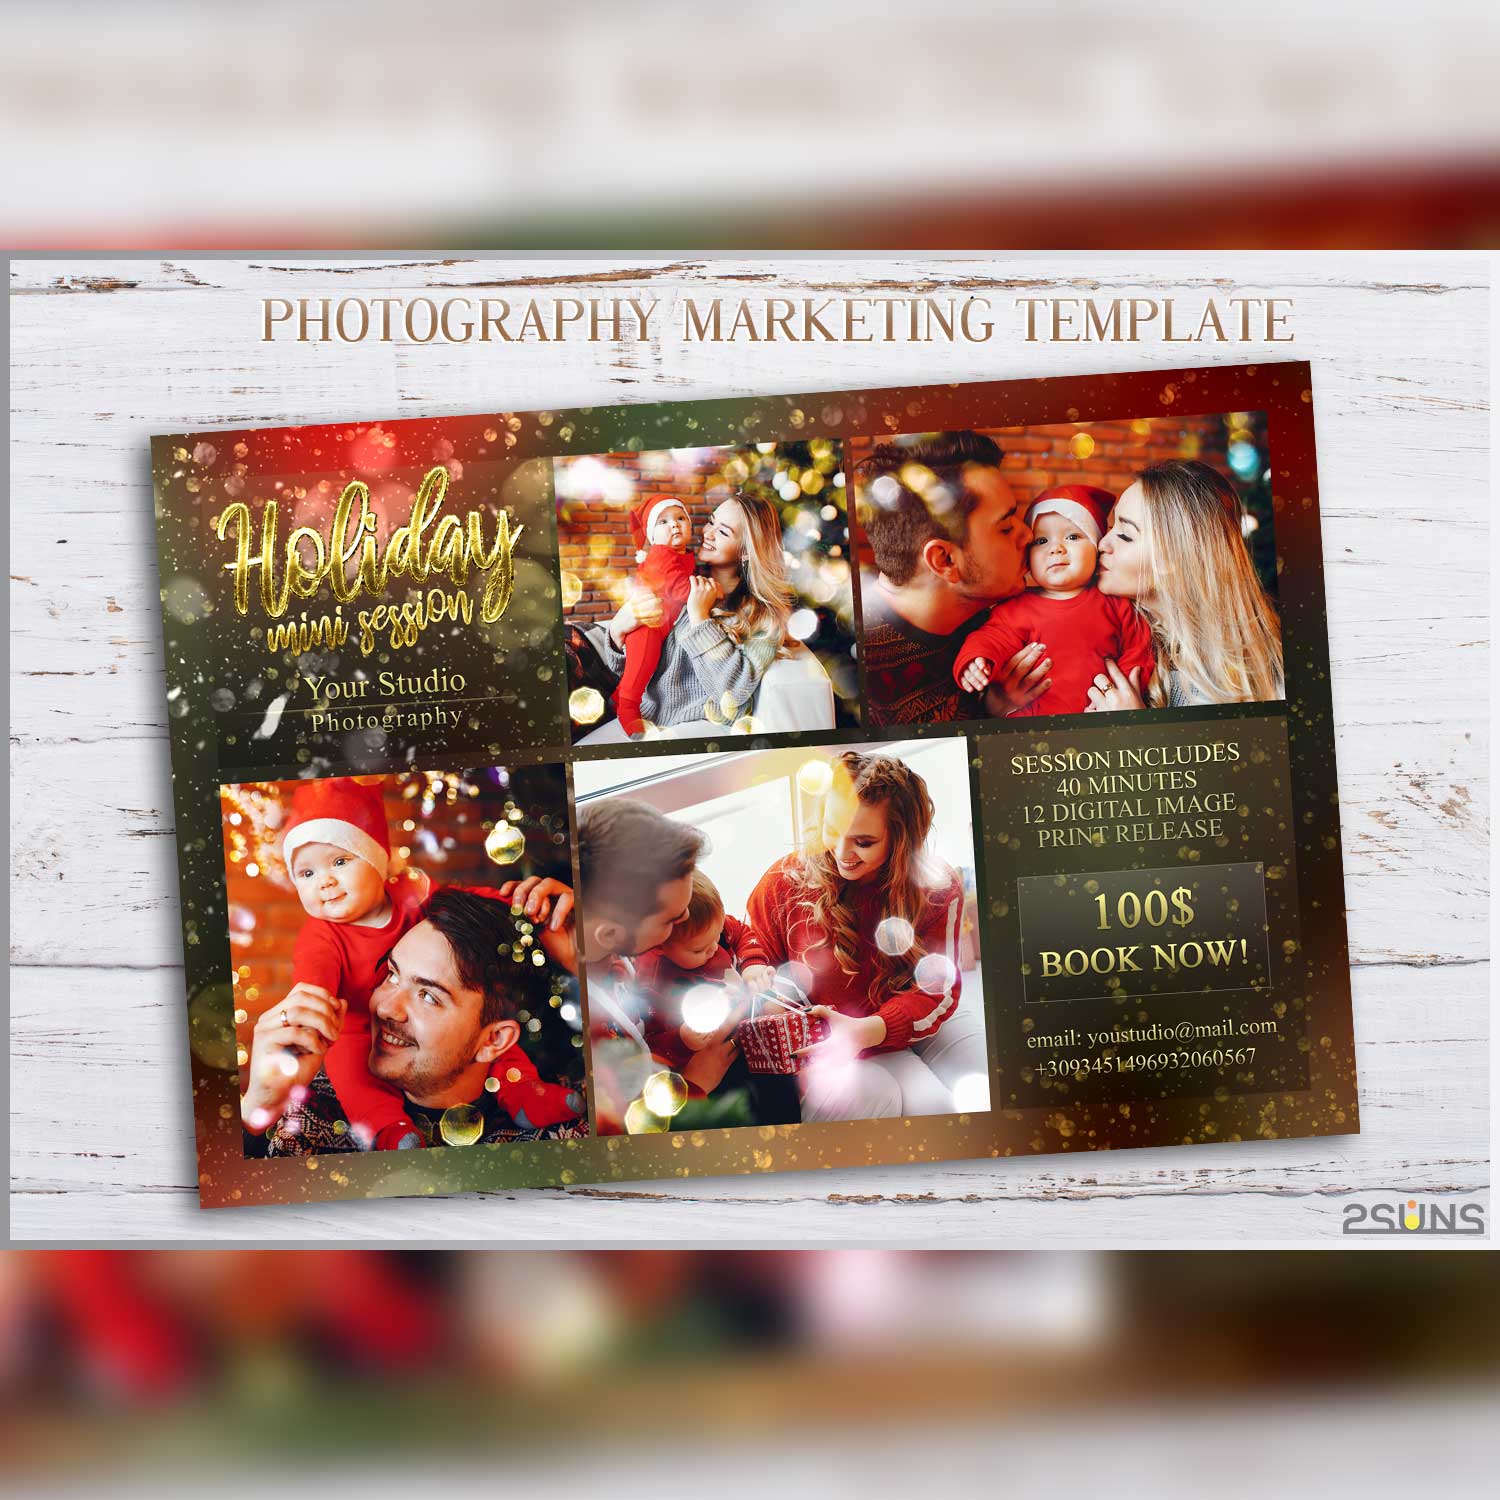 Christmas Marketing Board Watercolor Instagram Template Examples.